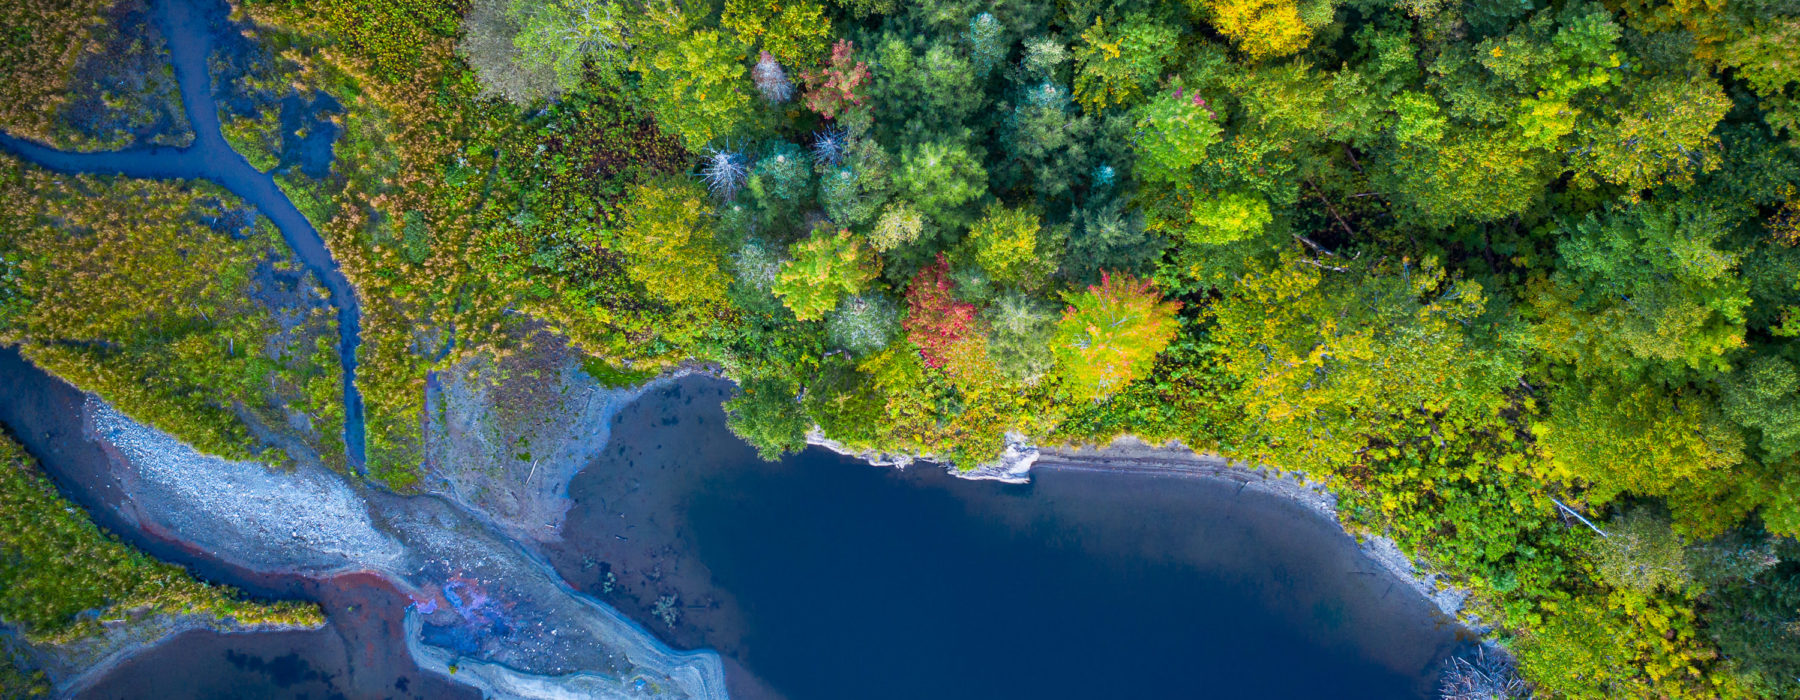 Aerial image of river with fall foliage